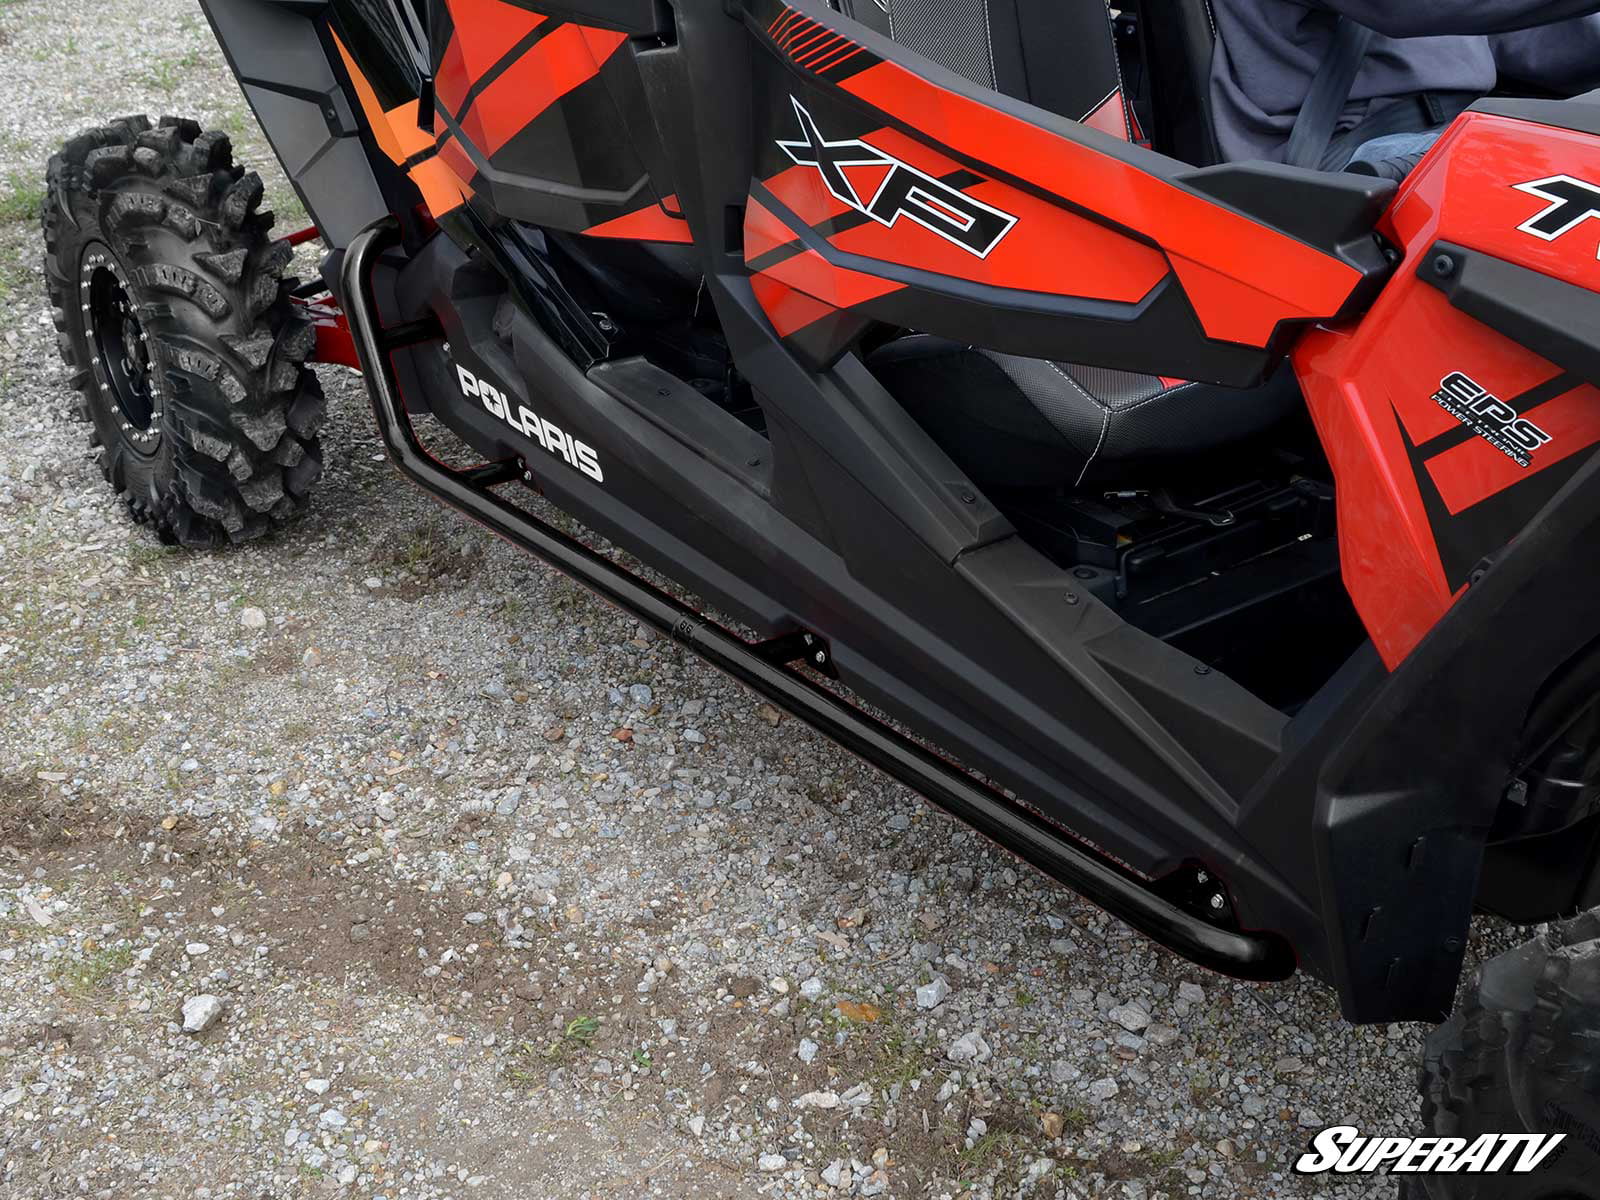 SuperATV Heavy-Duty Rock Sliding Nerf Bars for 2014+ Polaris RZR XP 1000 Made with 1.5” Diameter Steel Tubing Wrinkle Black Protects Against Trees and Rocks on Tight Routes! 